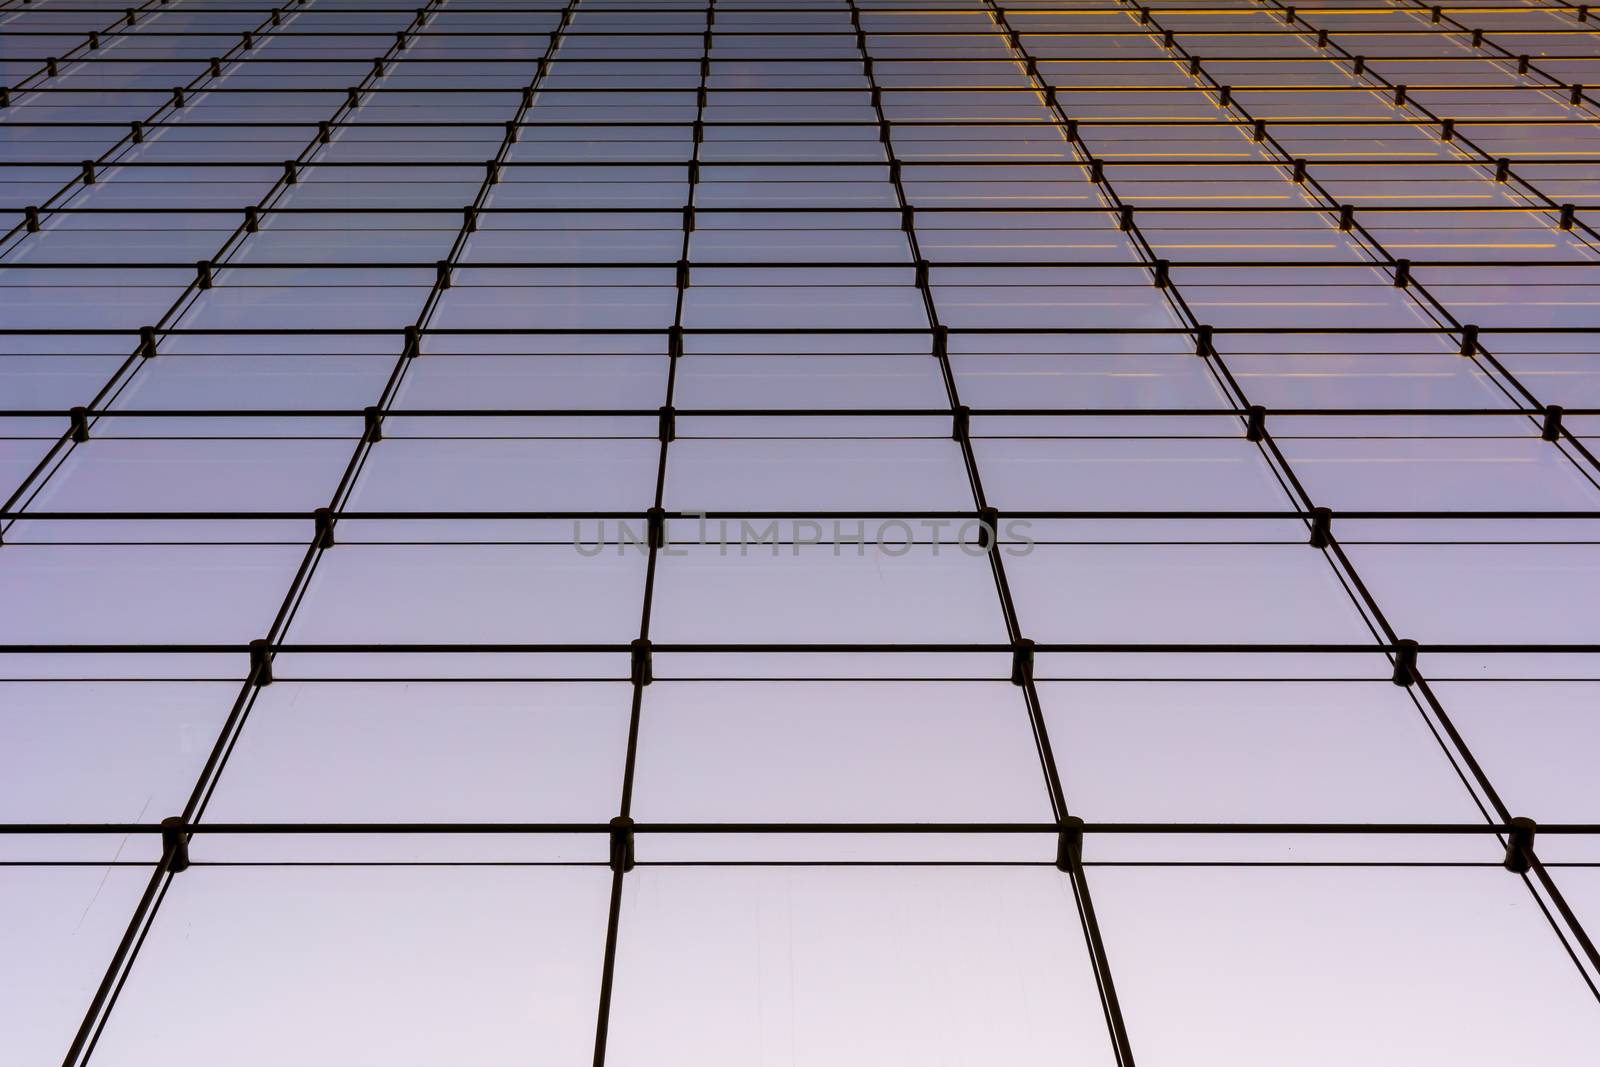 wall of glass, office building, windows framed with metal, vivid colors blue, magenta and orange by kb79